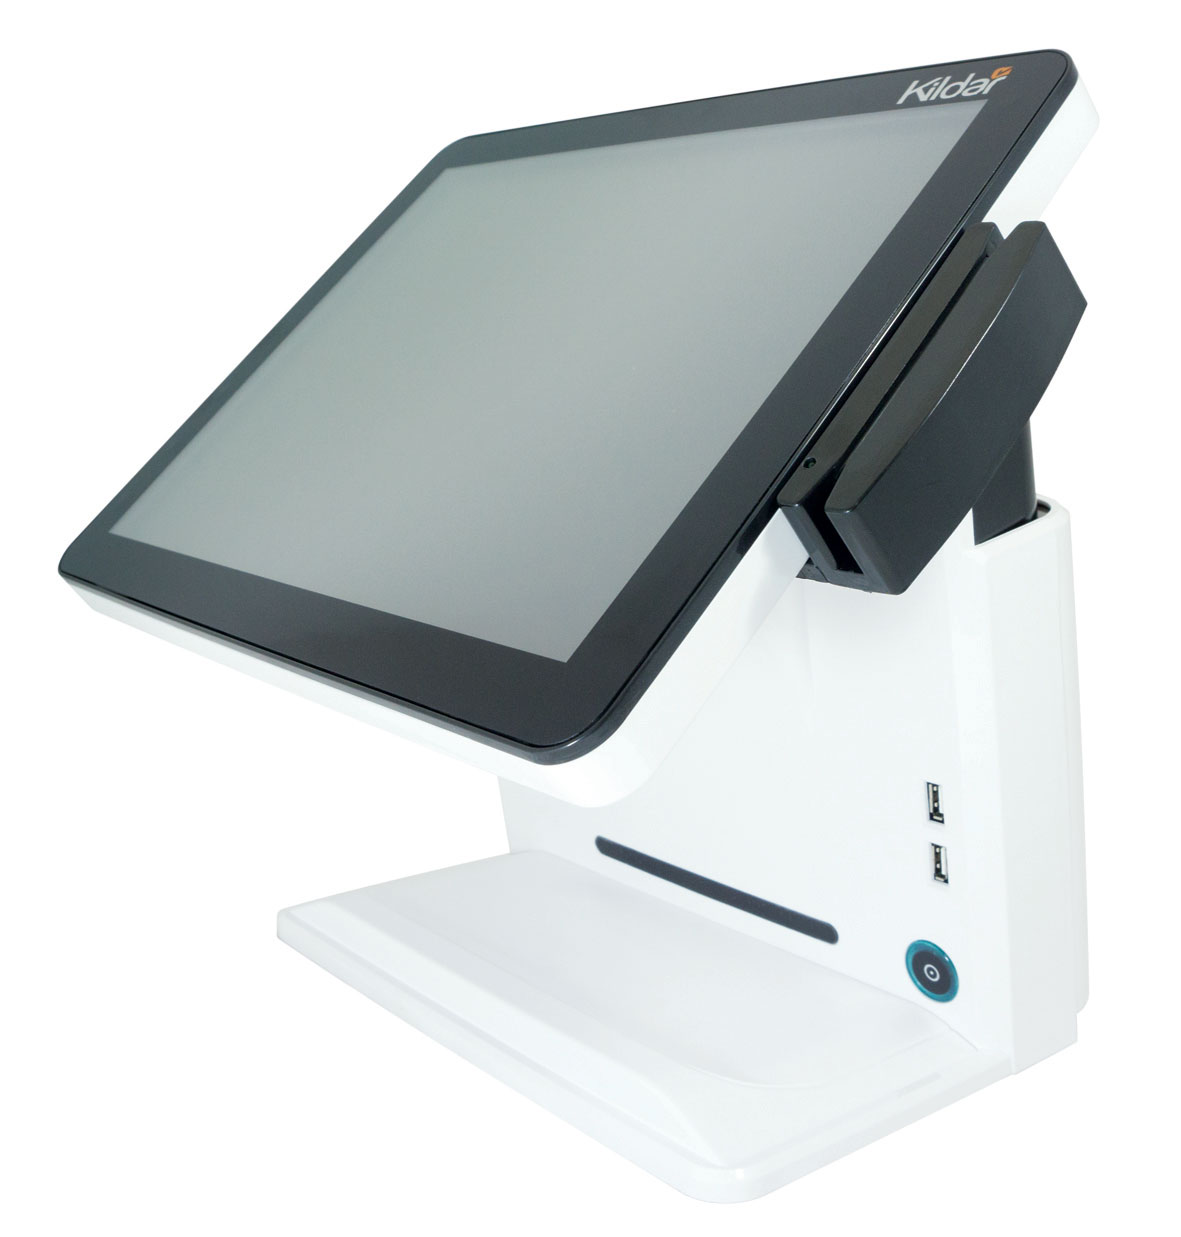 KILDAR - POS Touch Screen Terminals - DataTouch T1575 - Left Side